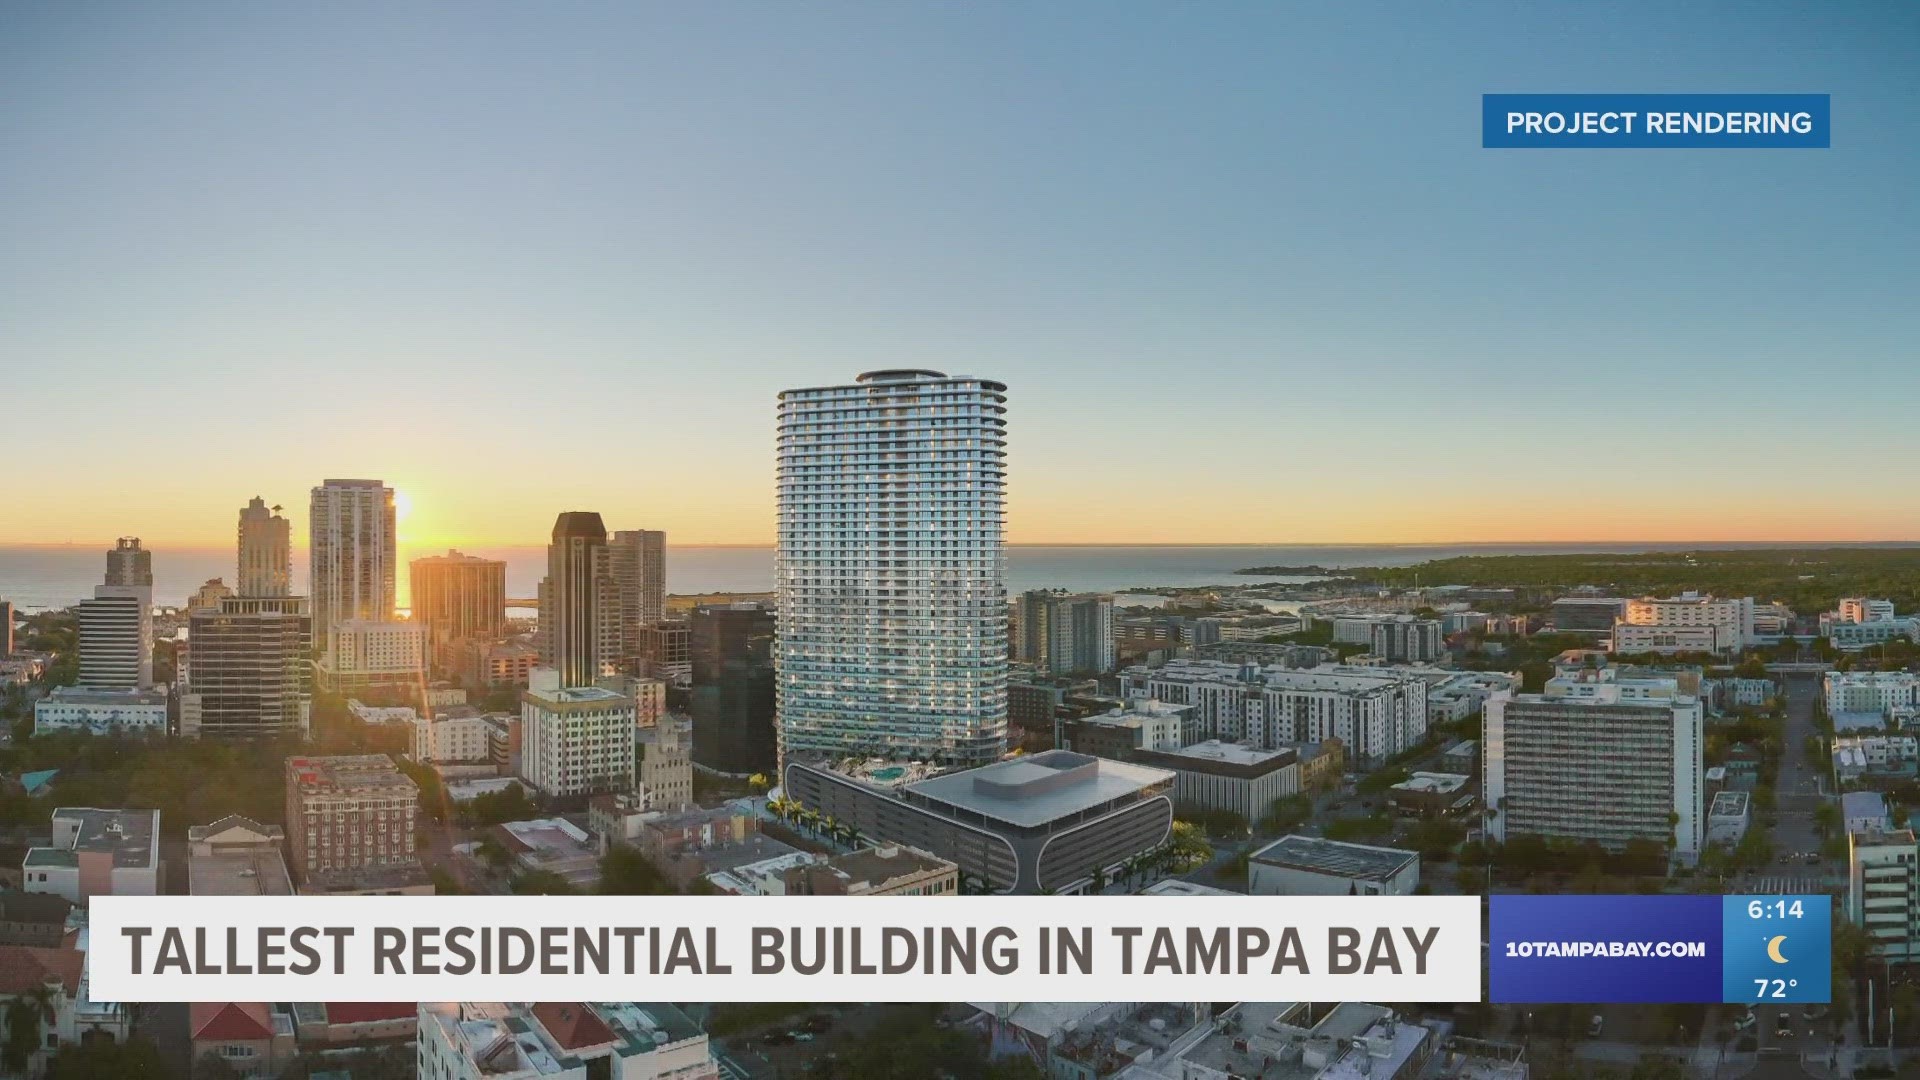 Construction of the 46-story "400 Central" in downtown St. Petersburg is expected to be complete by next Spring, with residents set to move in by Summer.